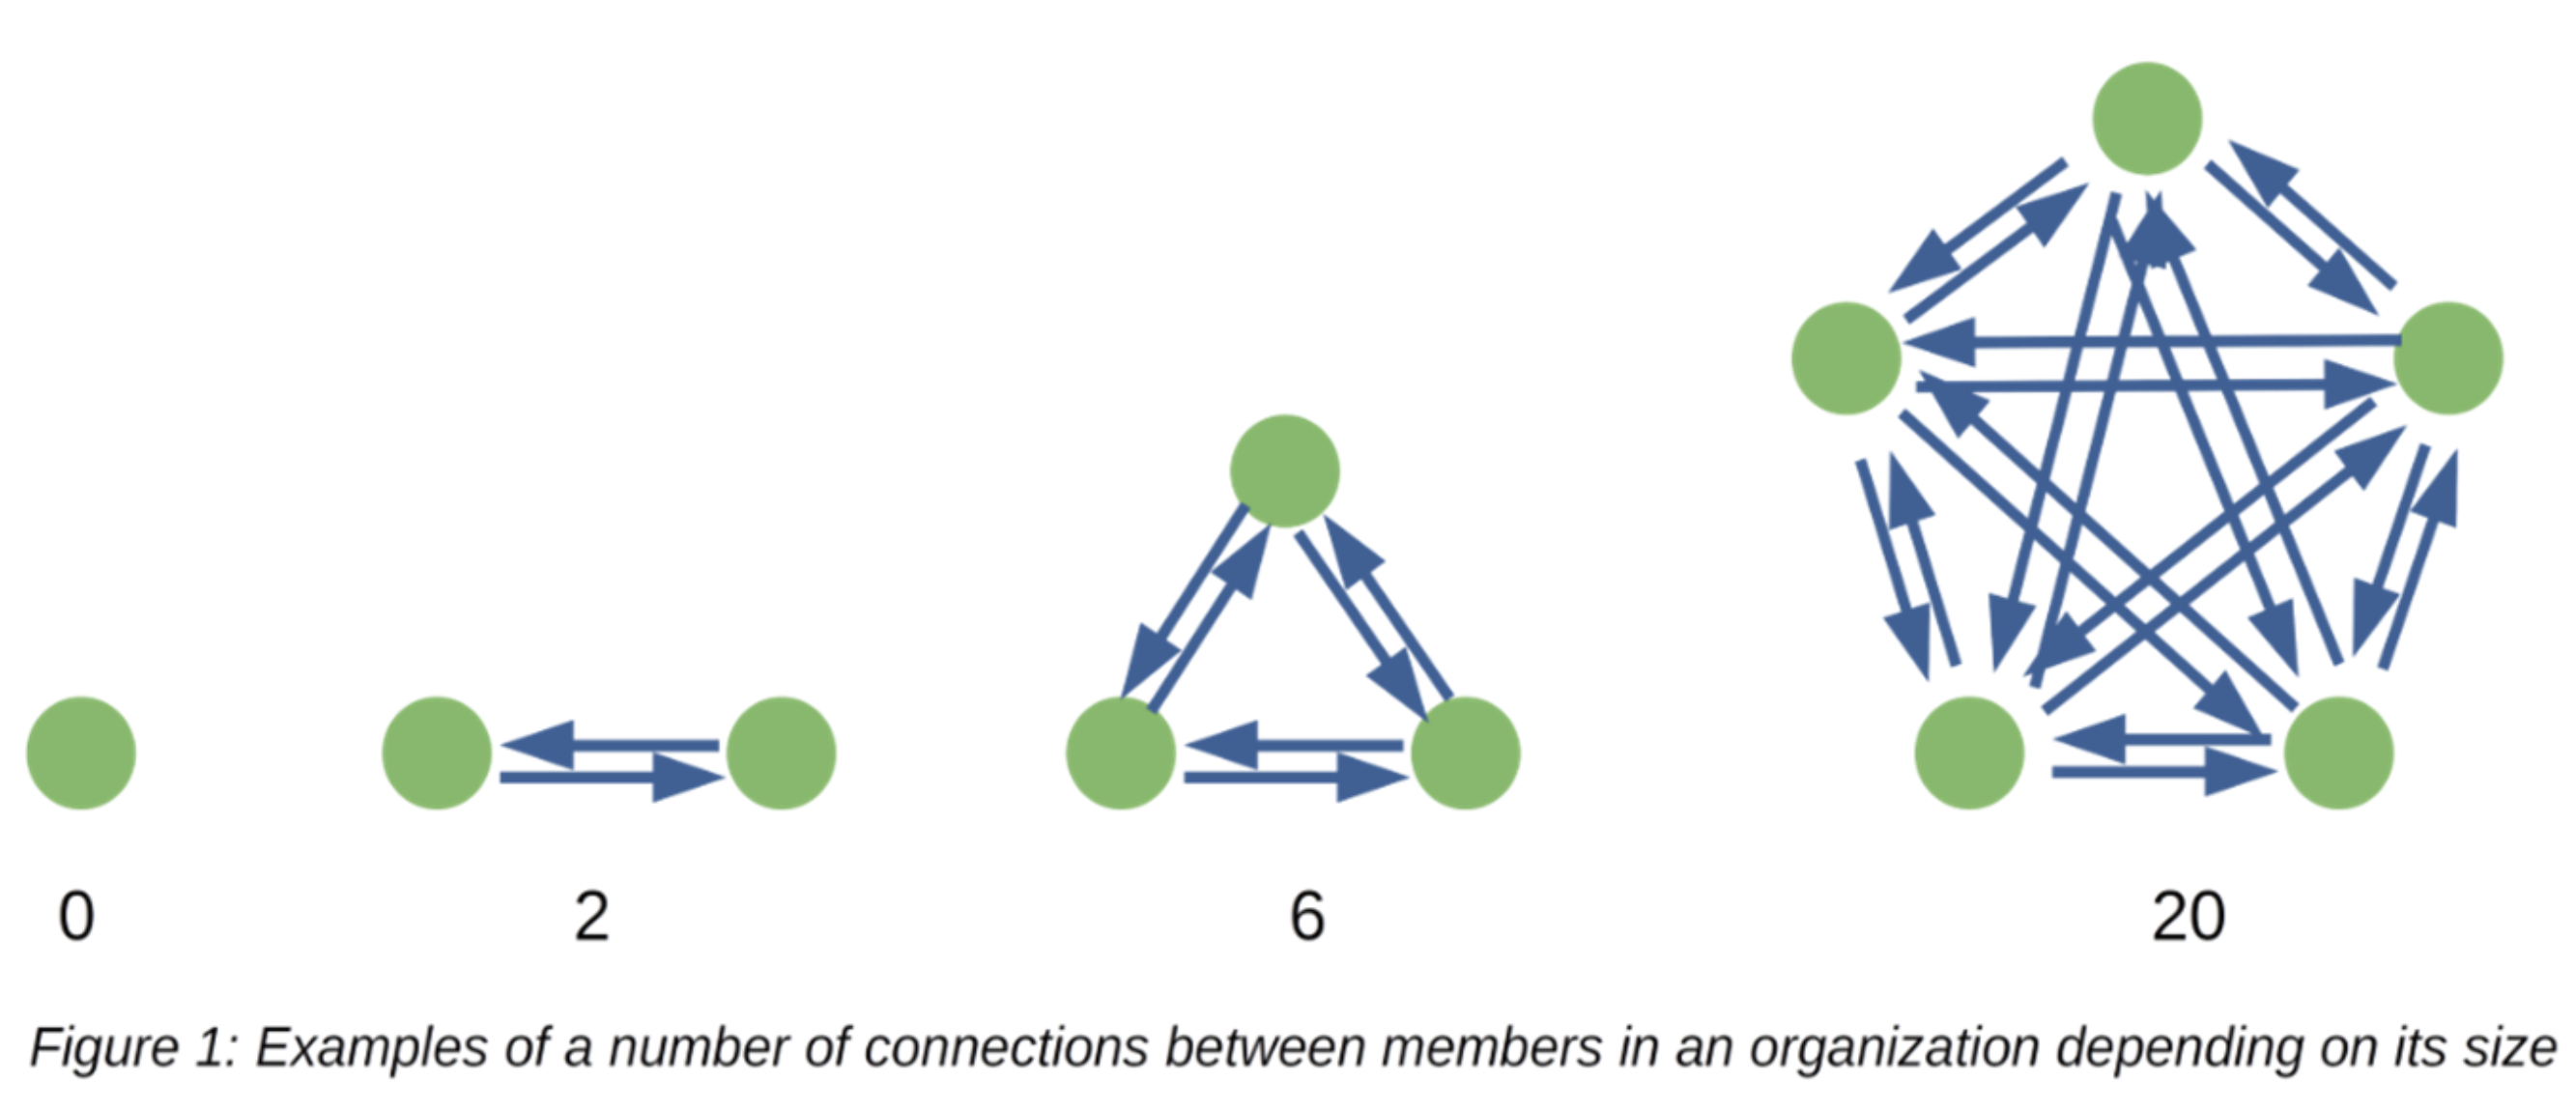 Examples of a number of connections between members in an organization depending on its size